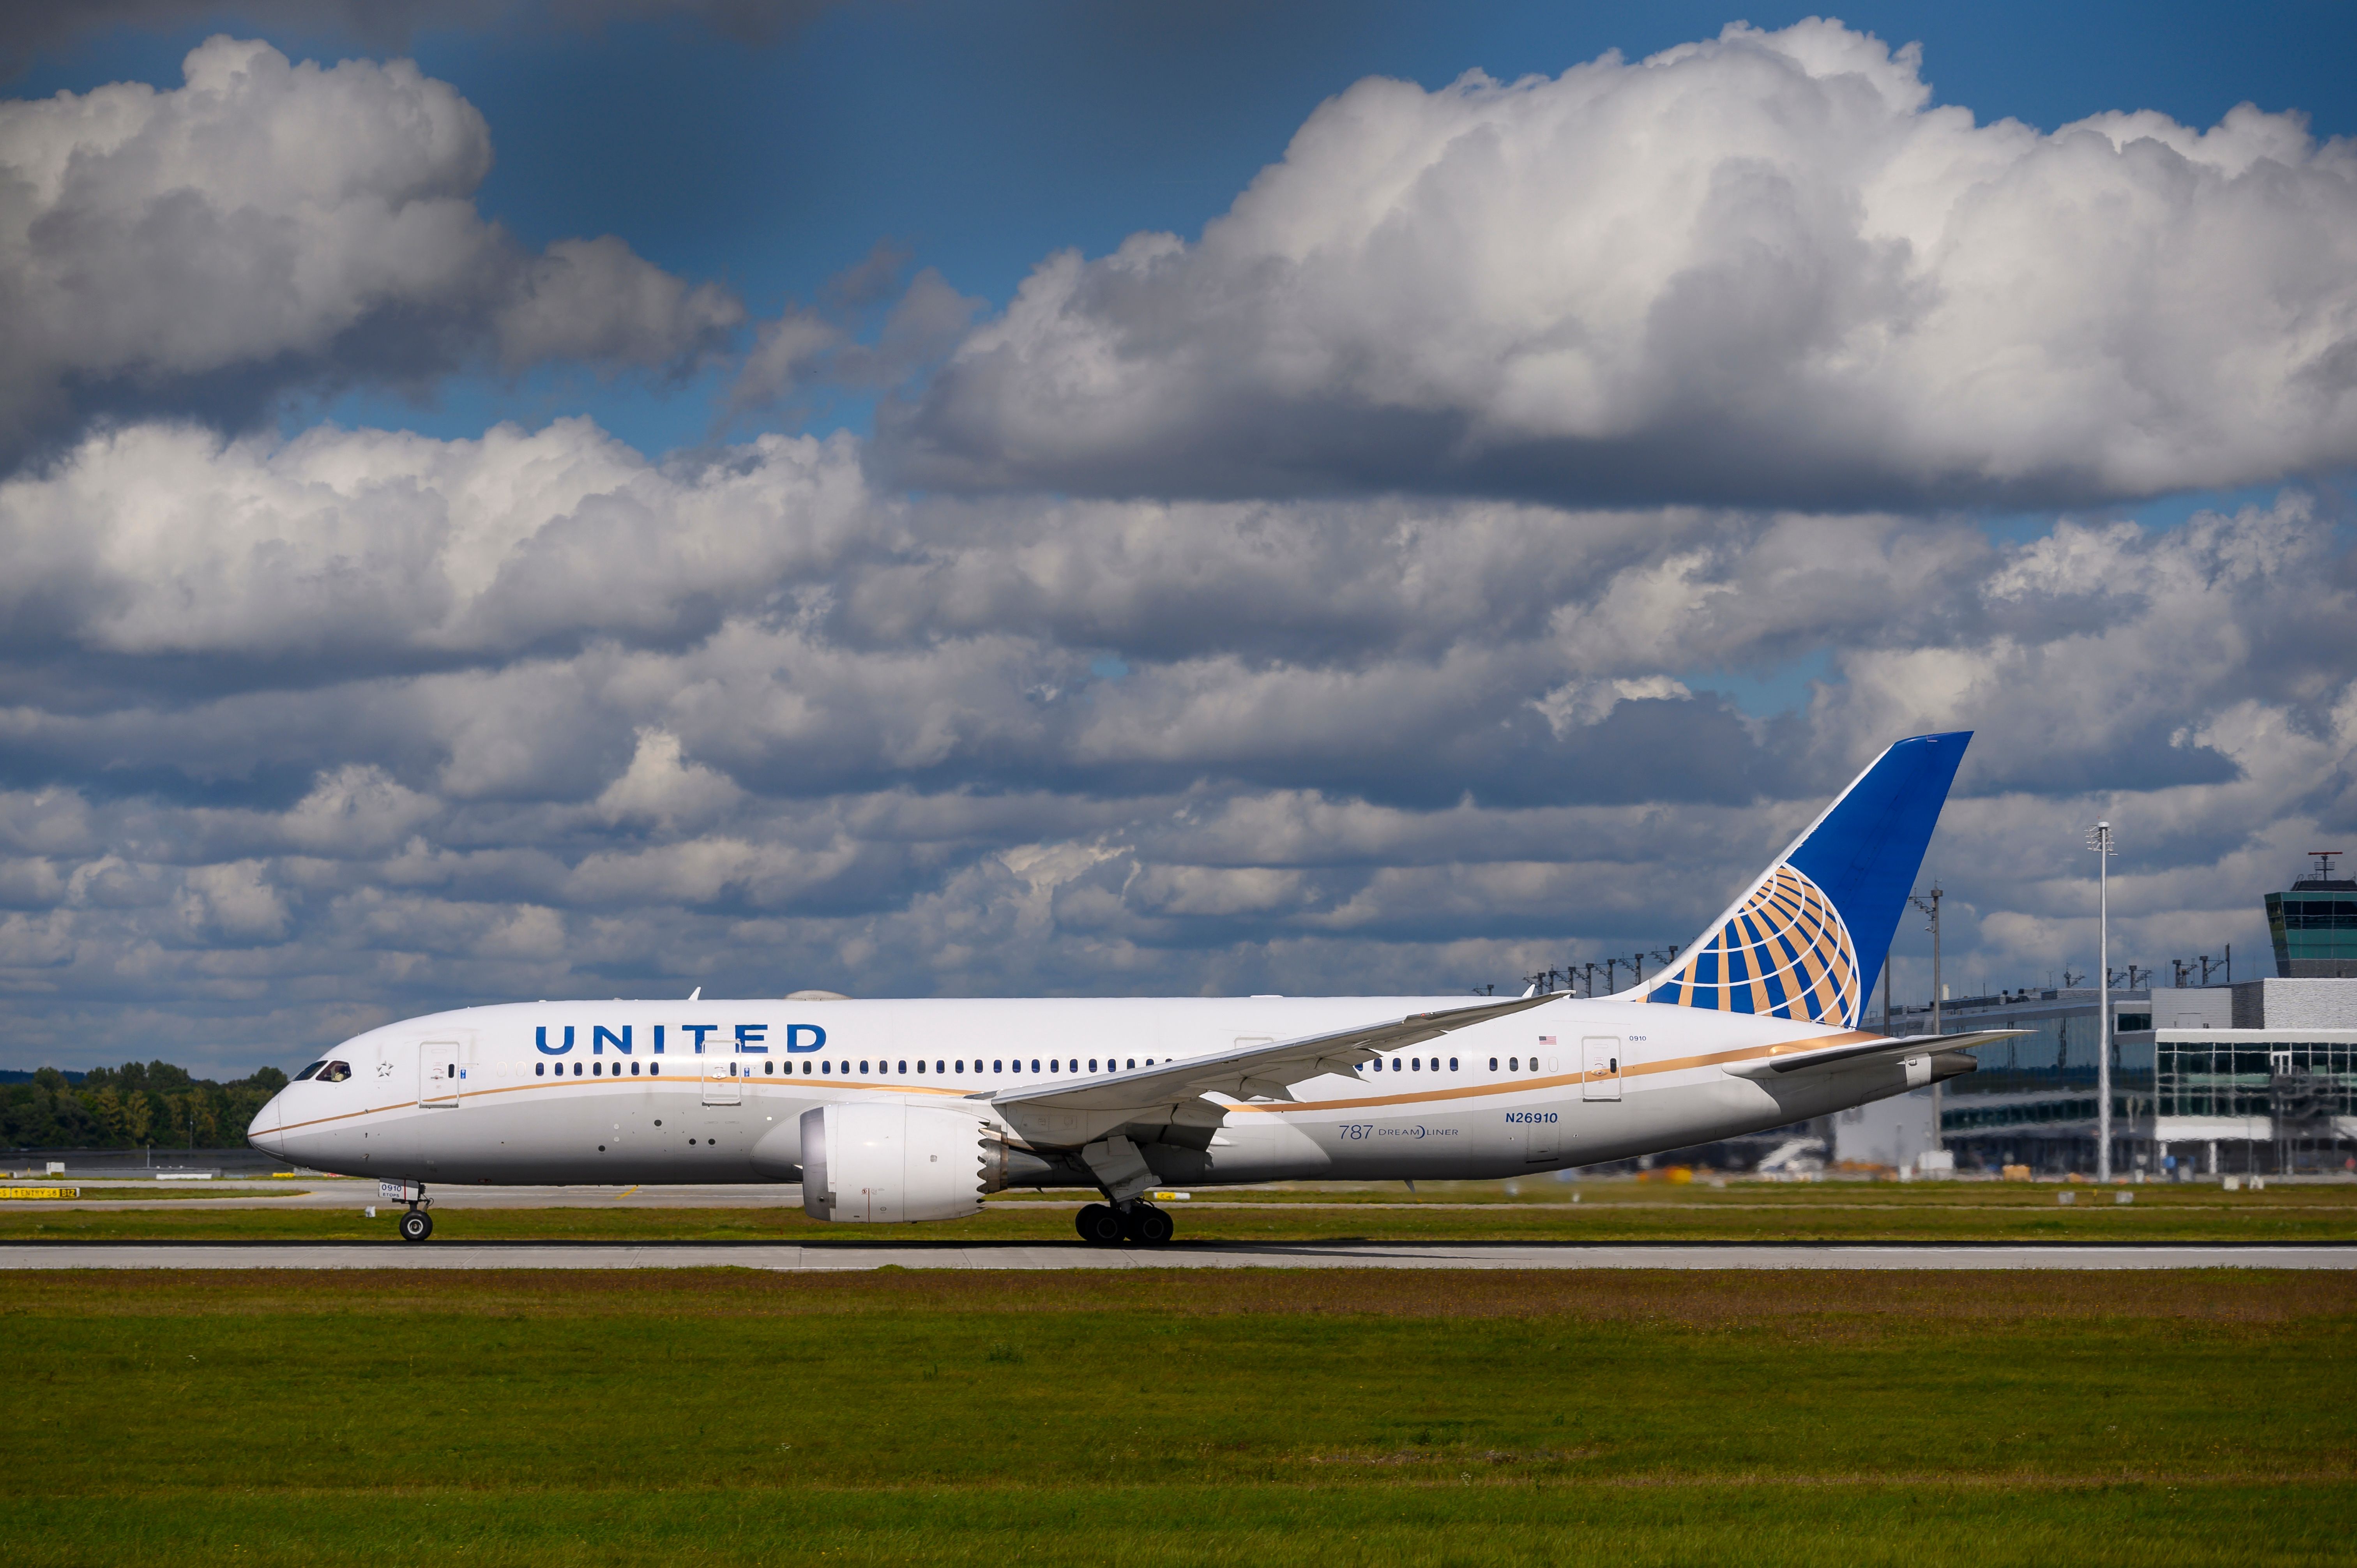 United Airlines Boeing 787-8 Dreamliner at Munich Airport.